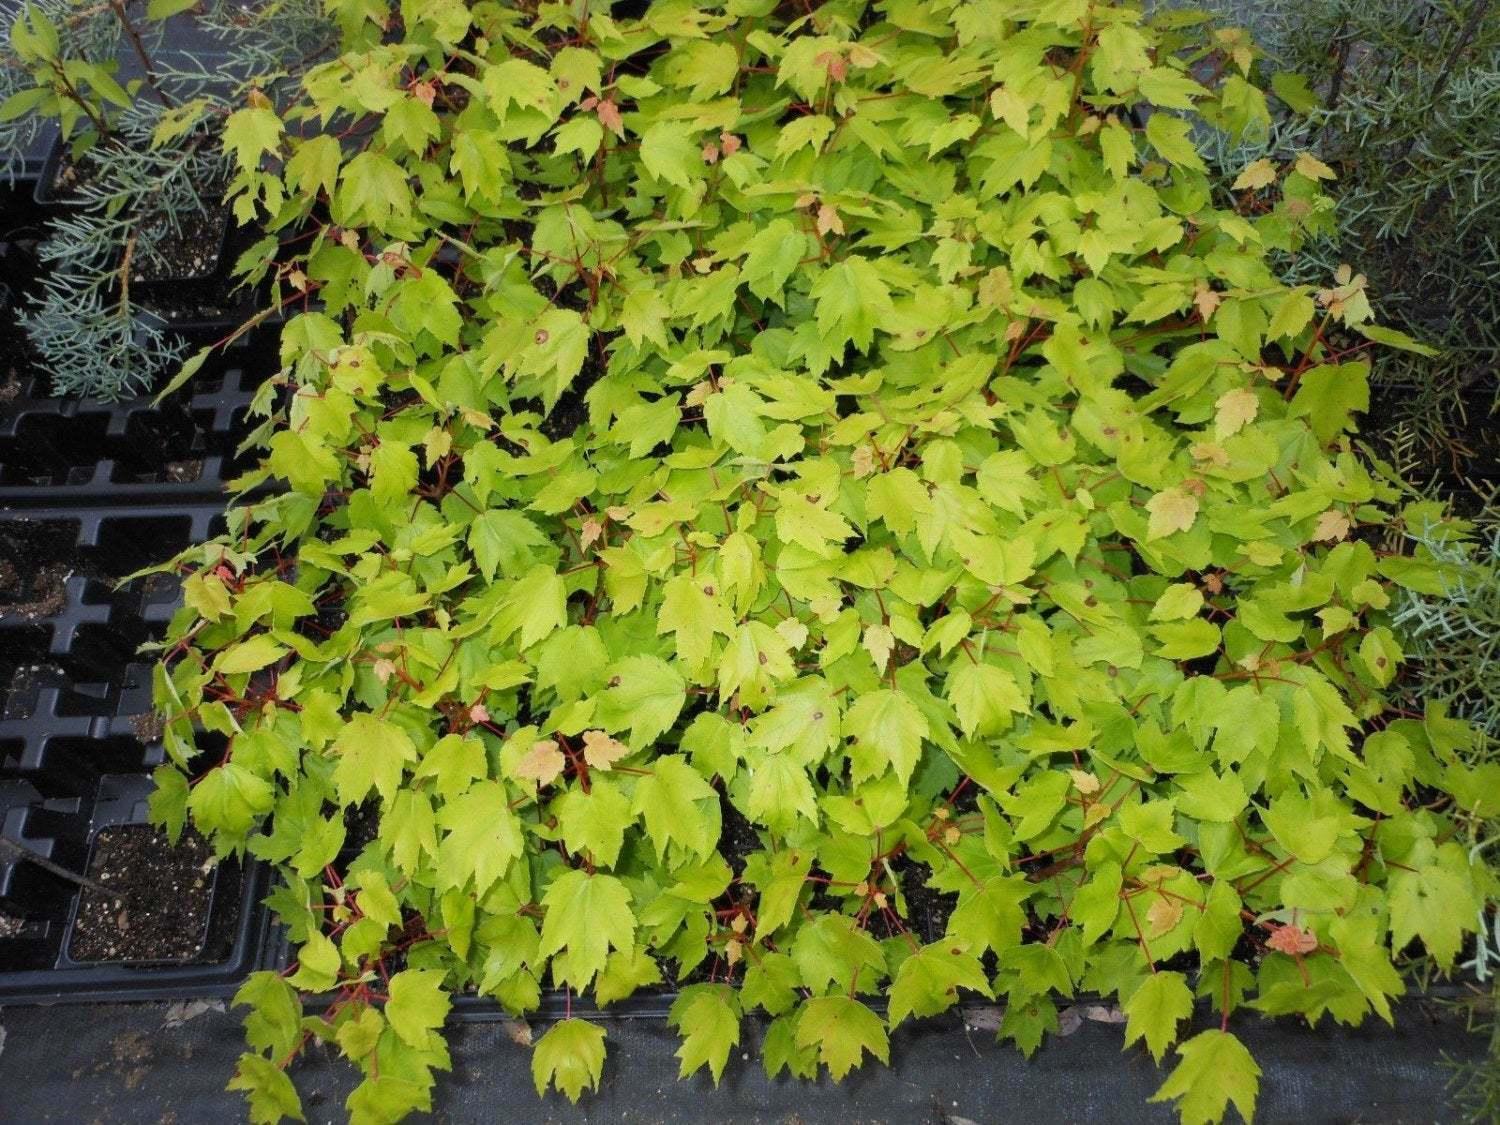 2 Red Maple Trees - Live Potted Plants - 12-16" Tall Seedlings - Quart Pots - The Nursery Center